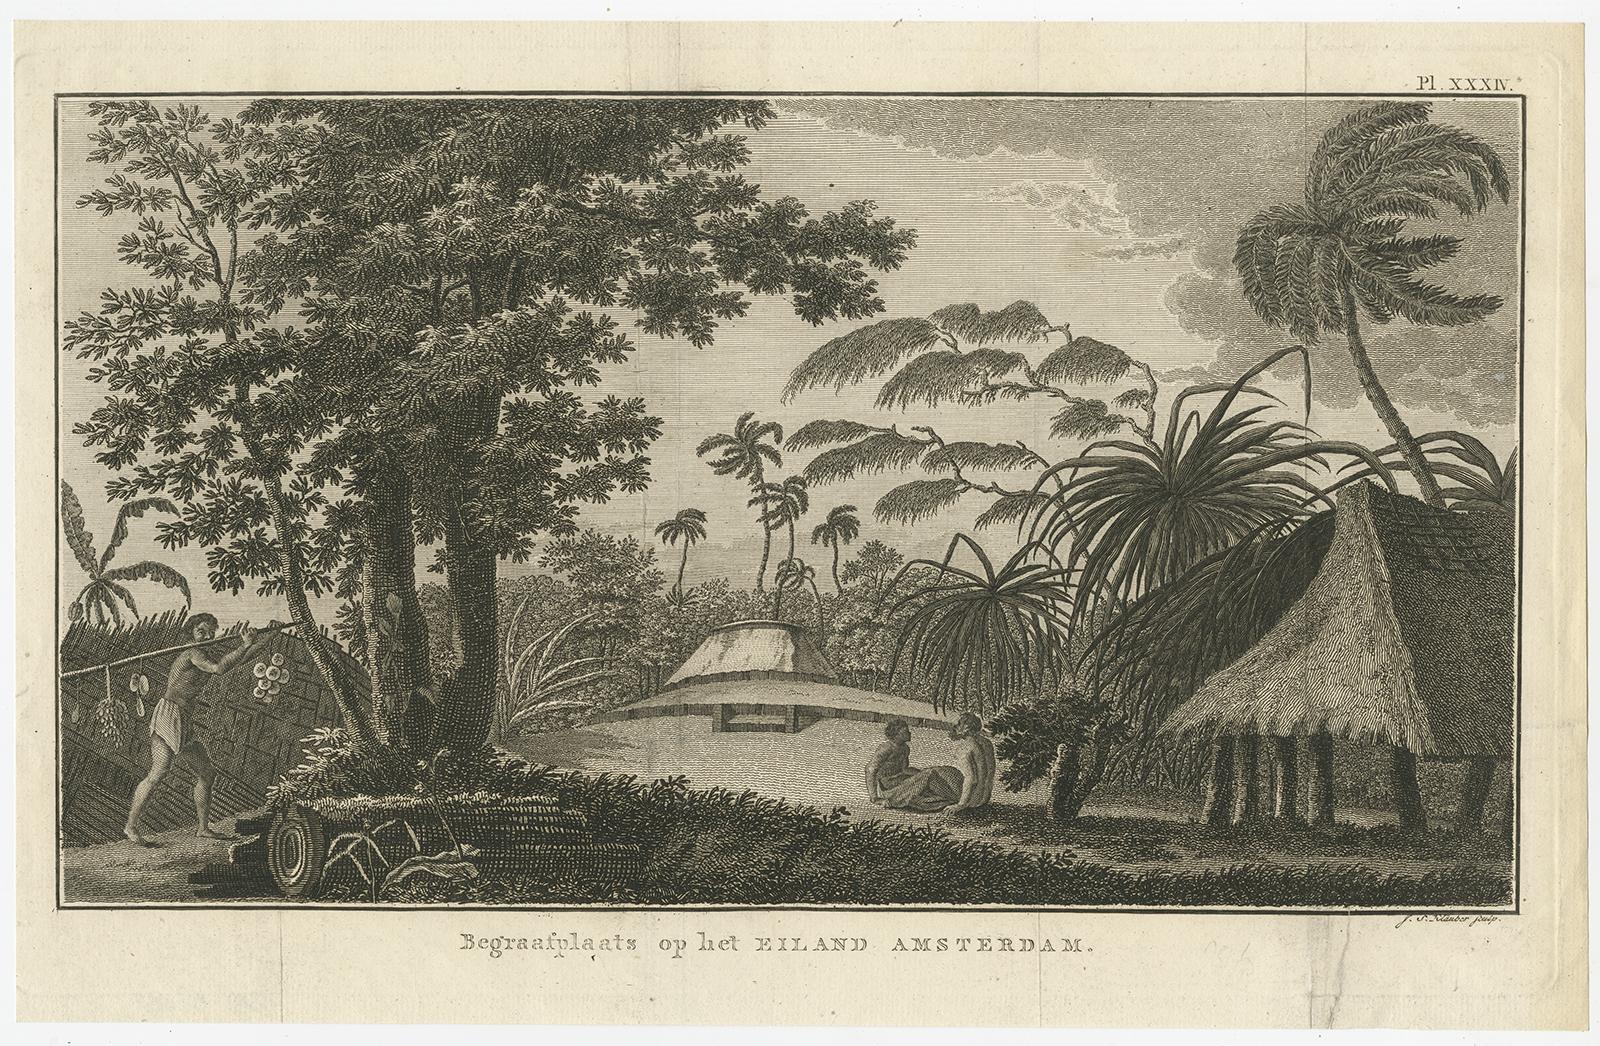 Antique print titled 'Begraafplaats op het eiland Amsterdam'. 

Engraved view of a local cemetery on Amsterdam Island, a small French territory in the southern Indian Ocean. Originates from 'Reizen Rondom de Waereld door James Cook (..)'.